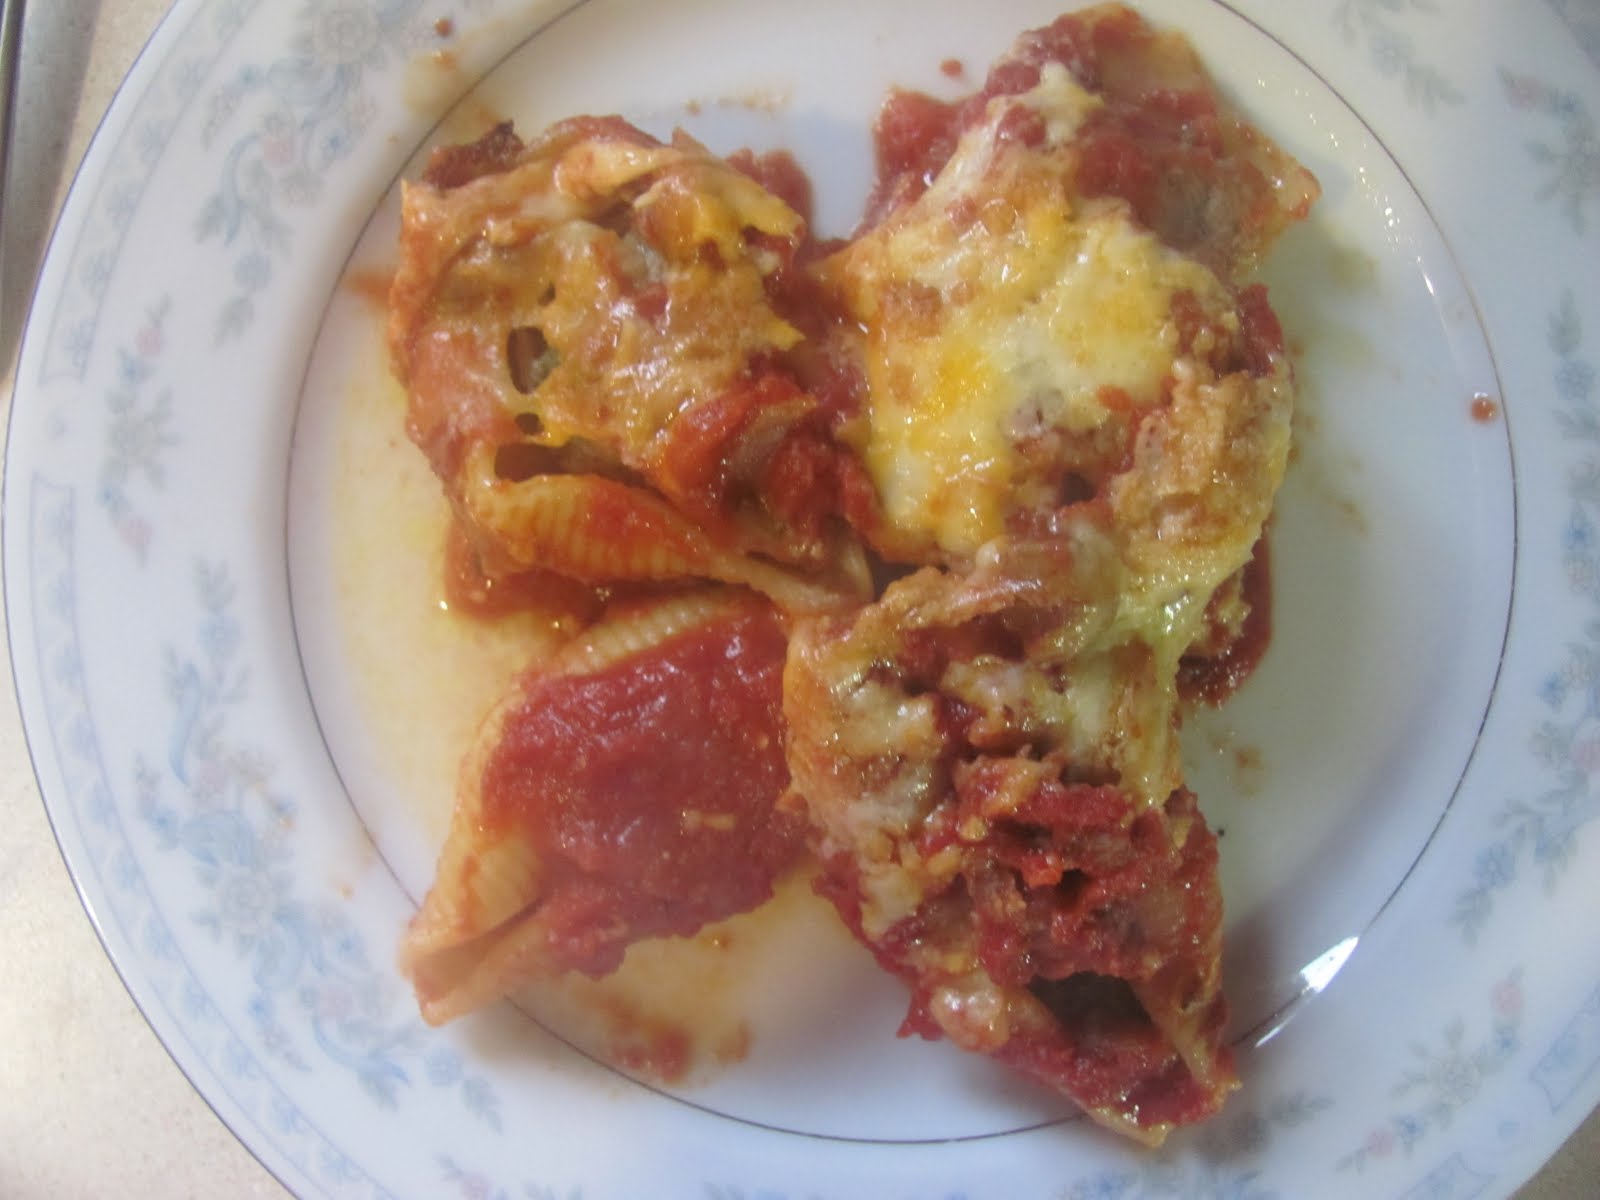 Healthy Choices: Baked Sausage-Stuffed Shells